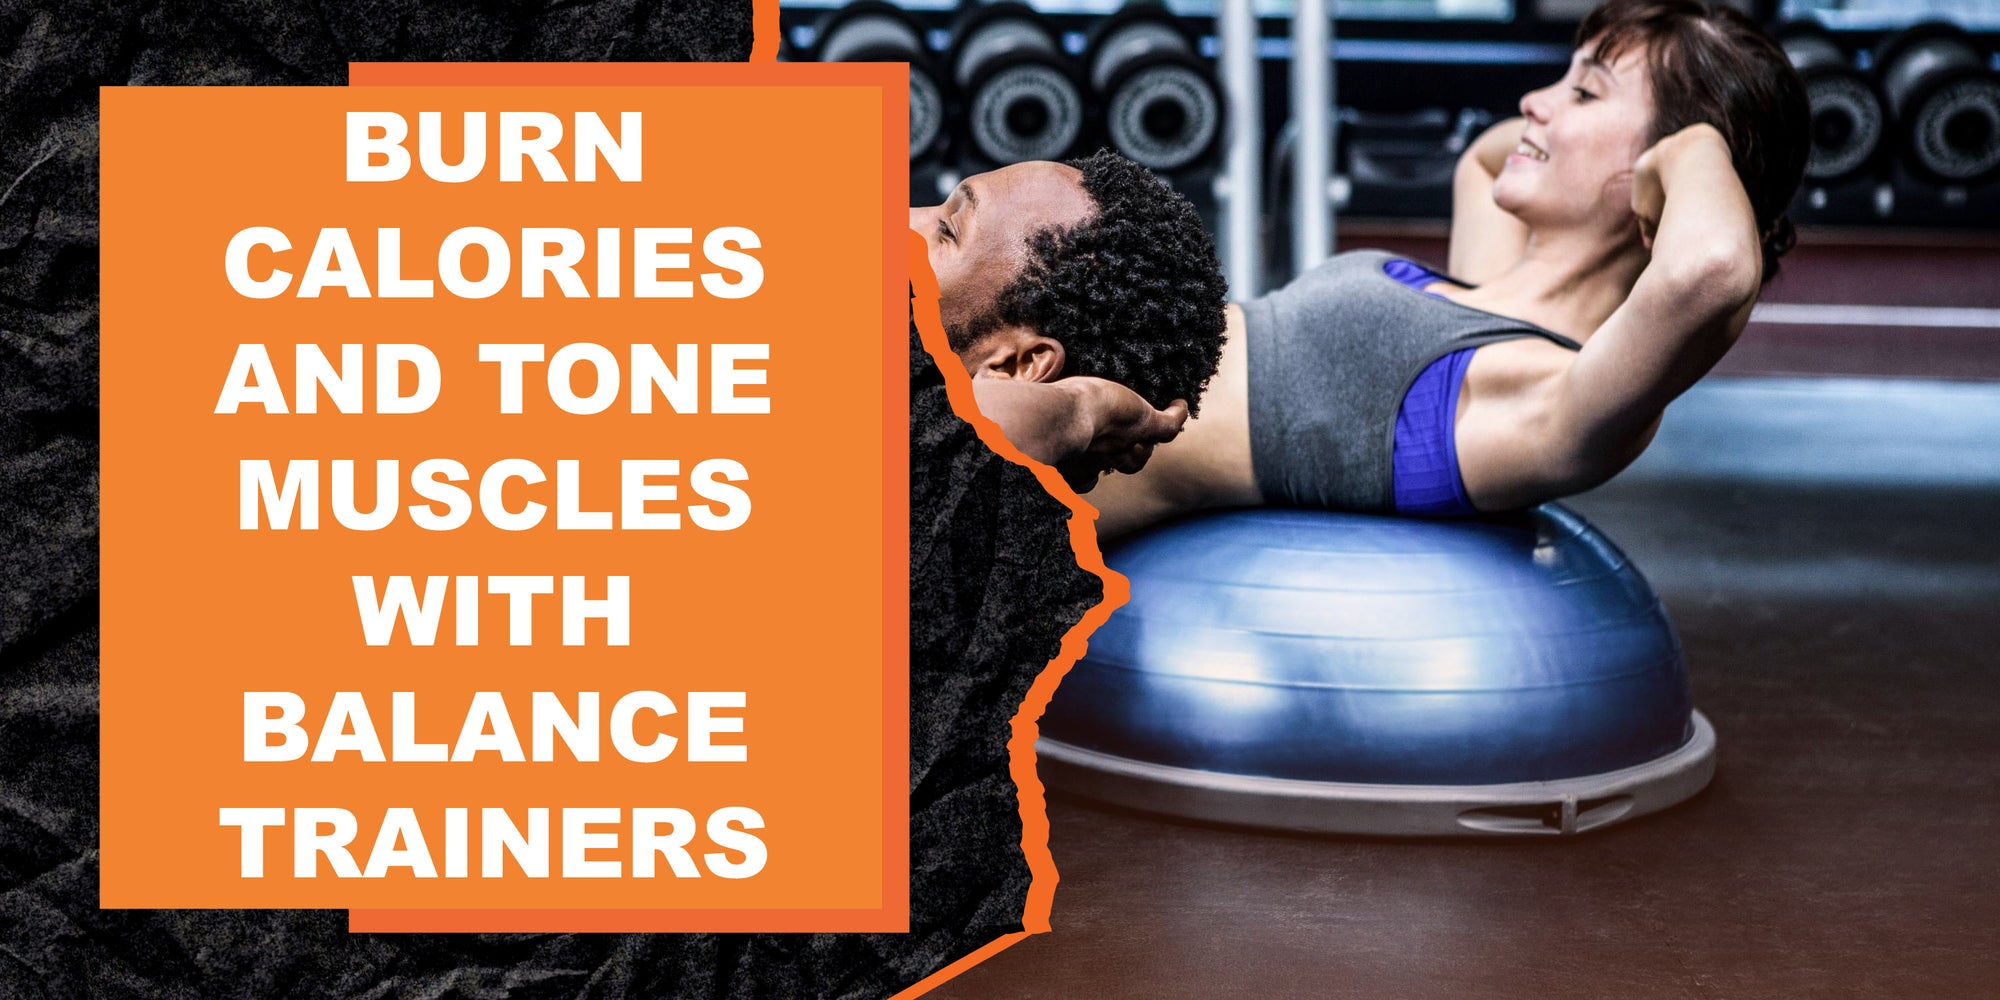 Burn Calories and Tone Muscles With Balance Trainers